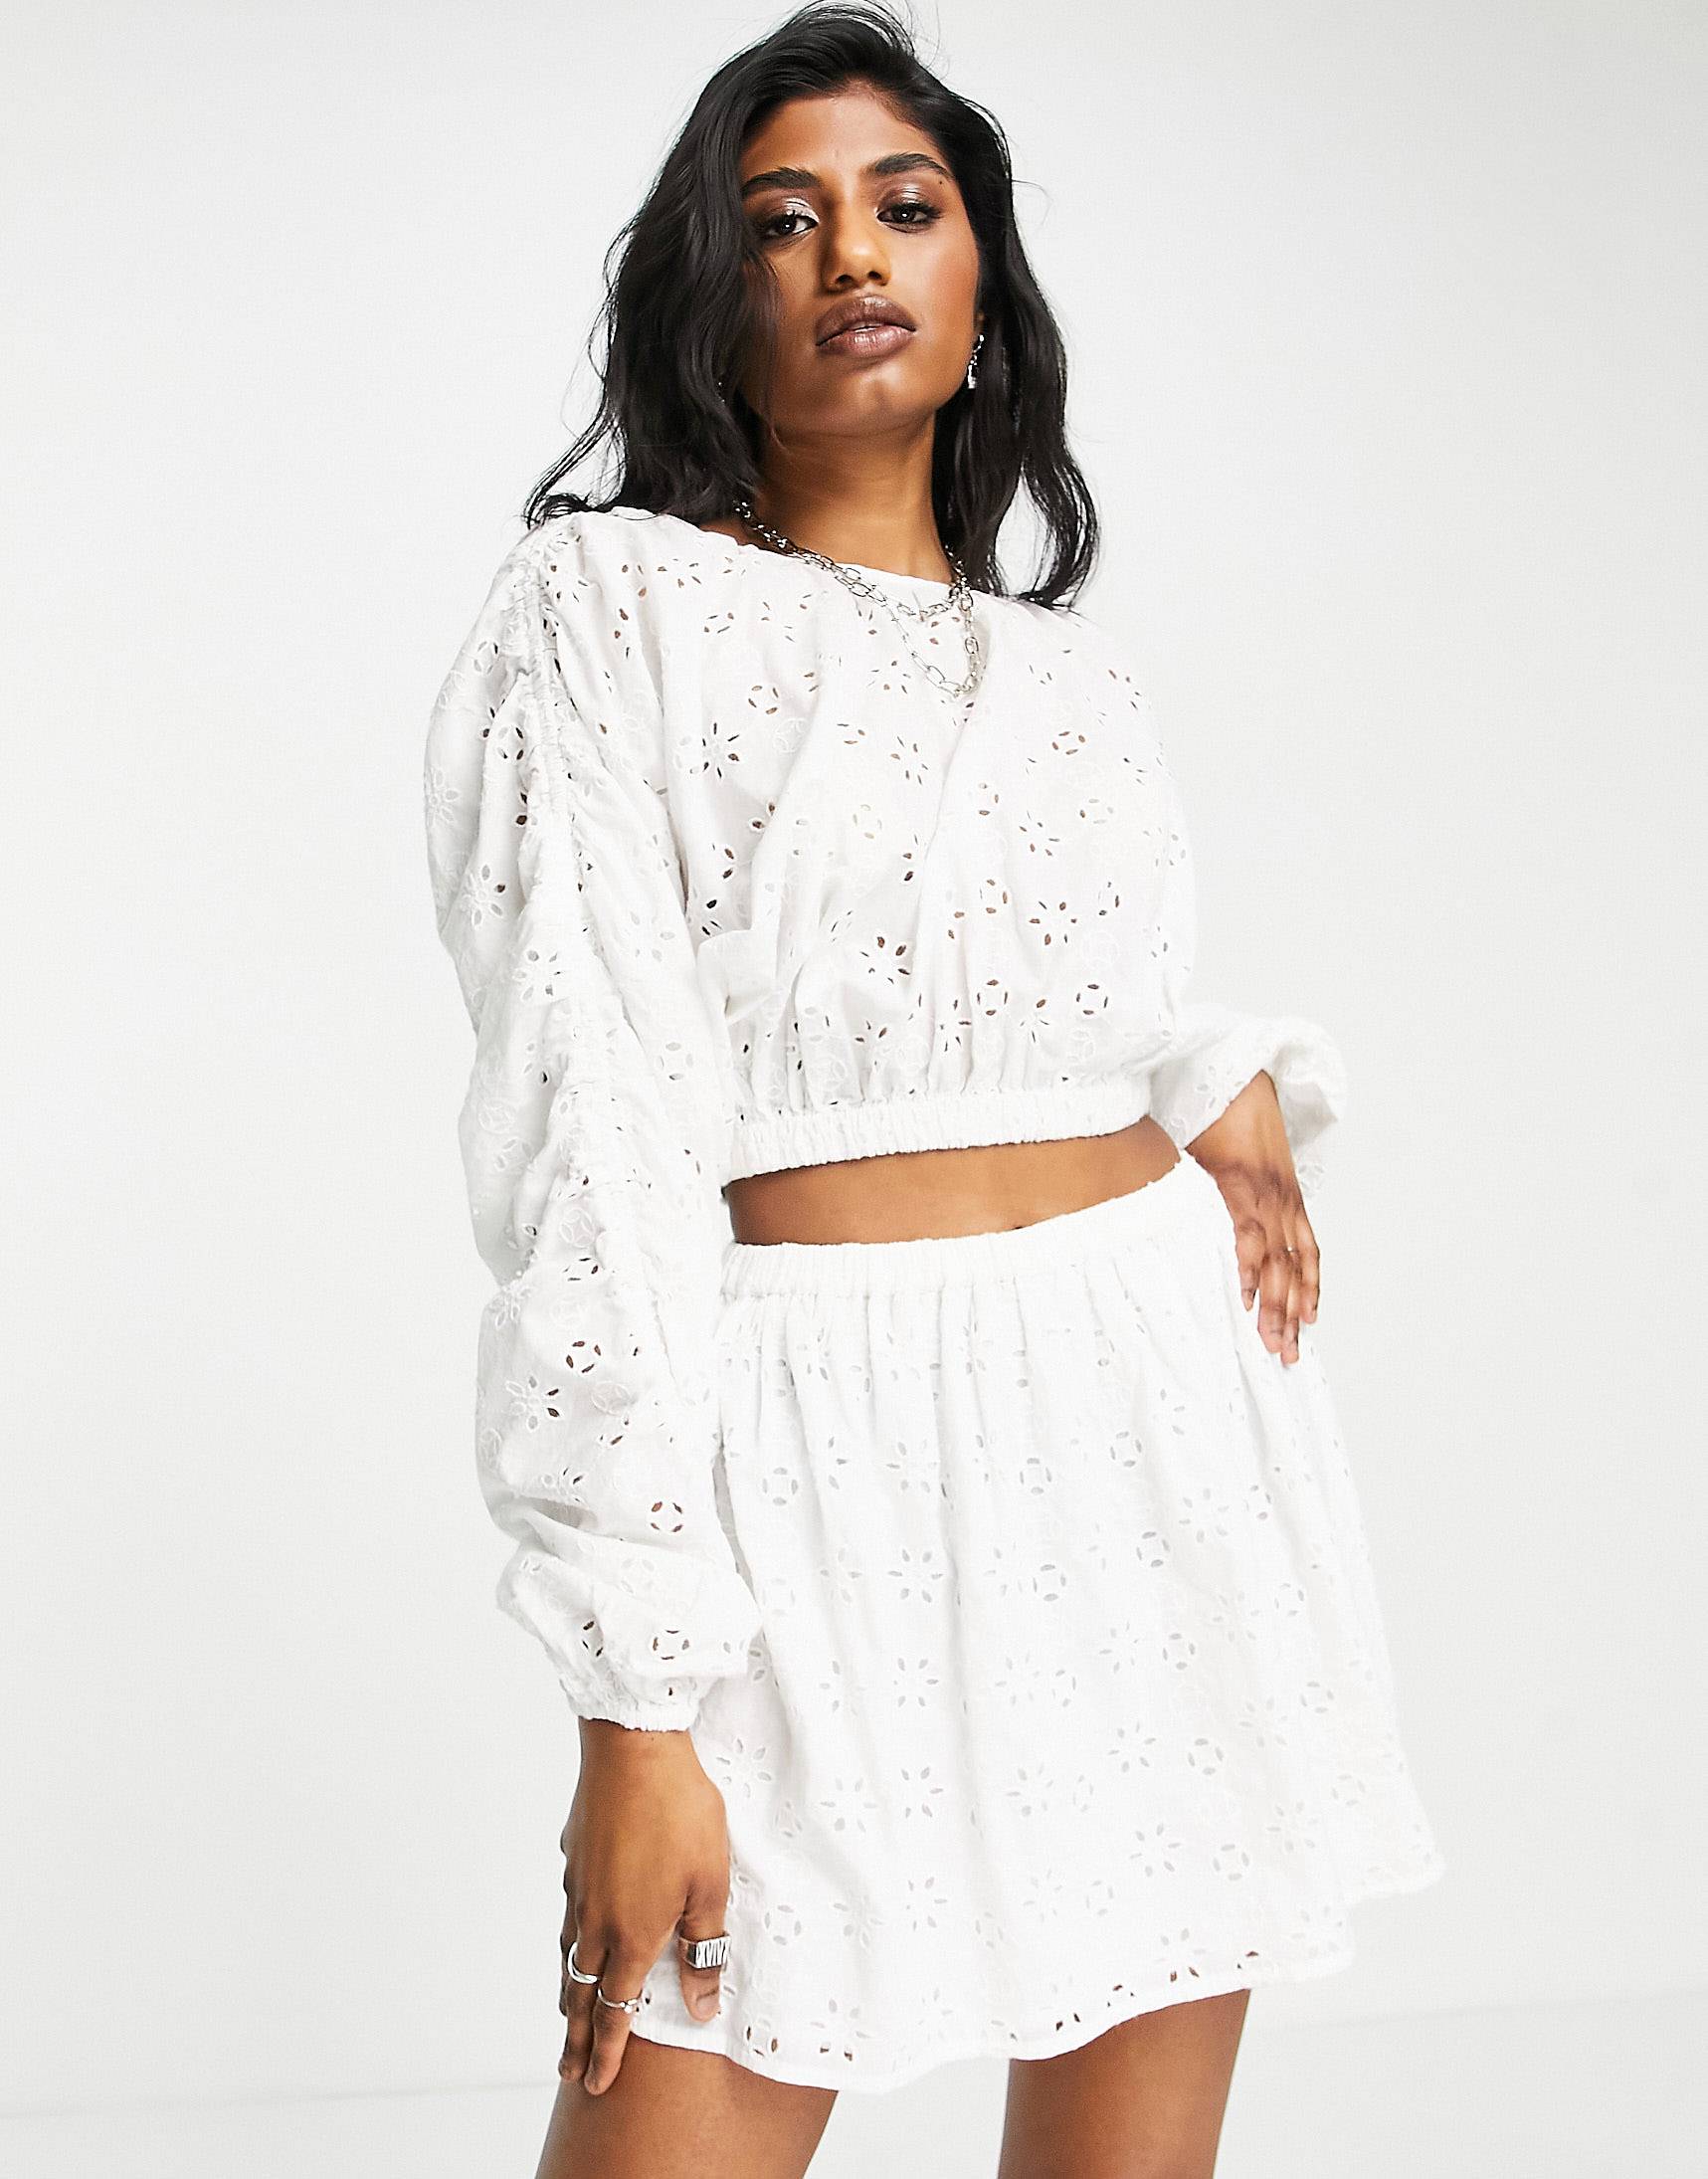 Мини юбка Topshop Broderie, белый юбка collusion knitted fairy hem co ord серый